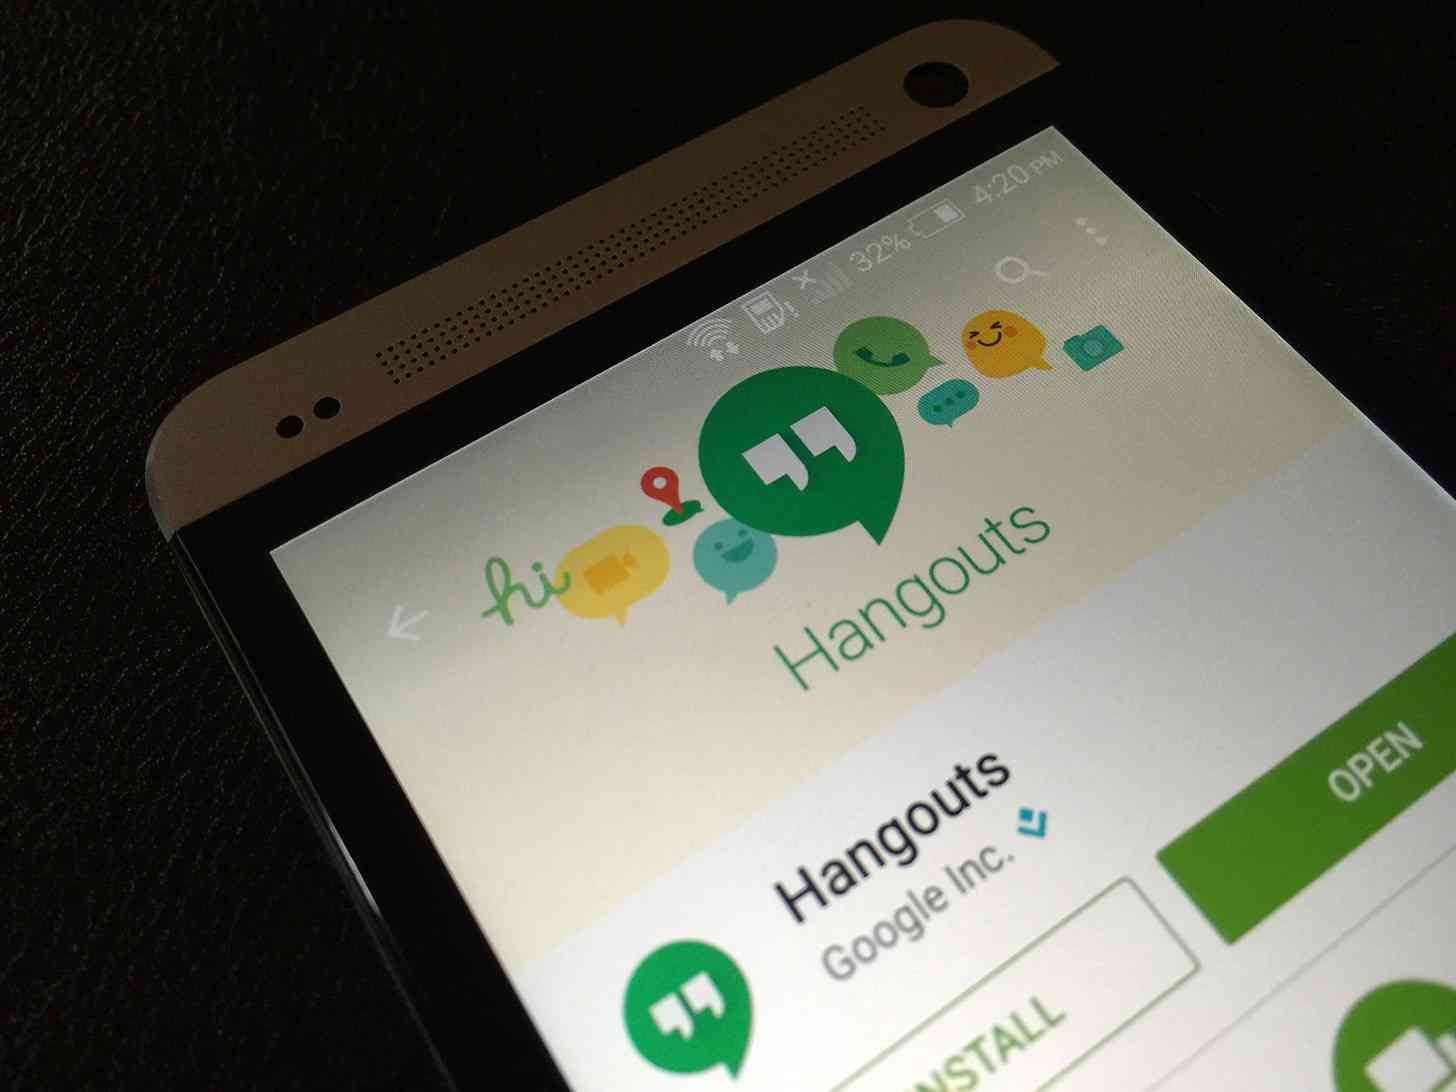 Hangouts for Android Google Play store